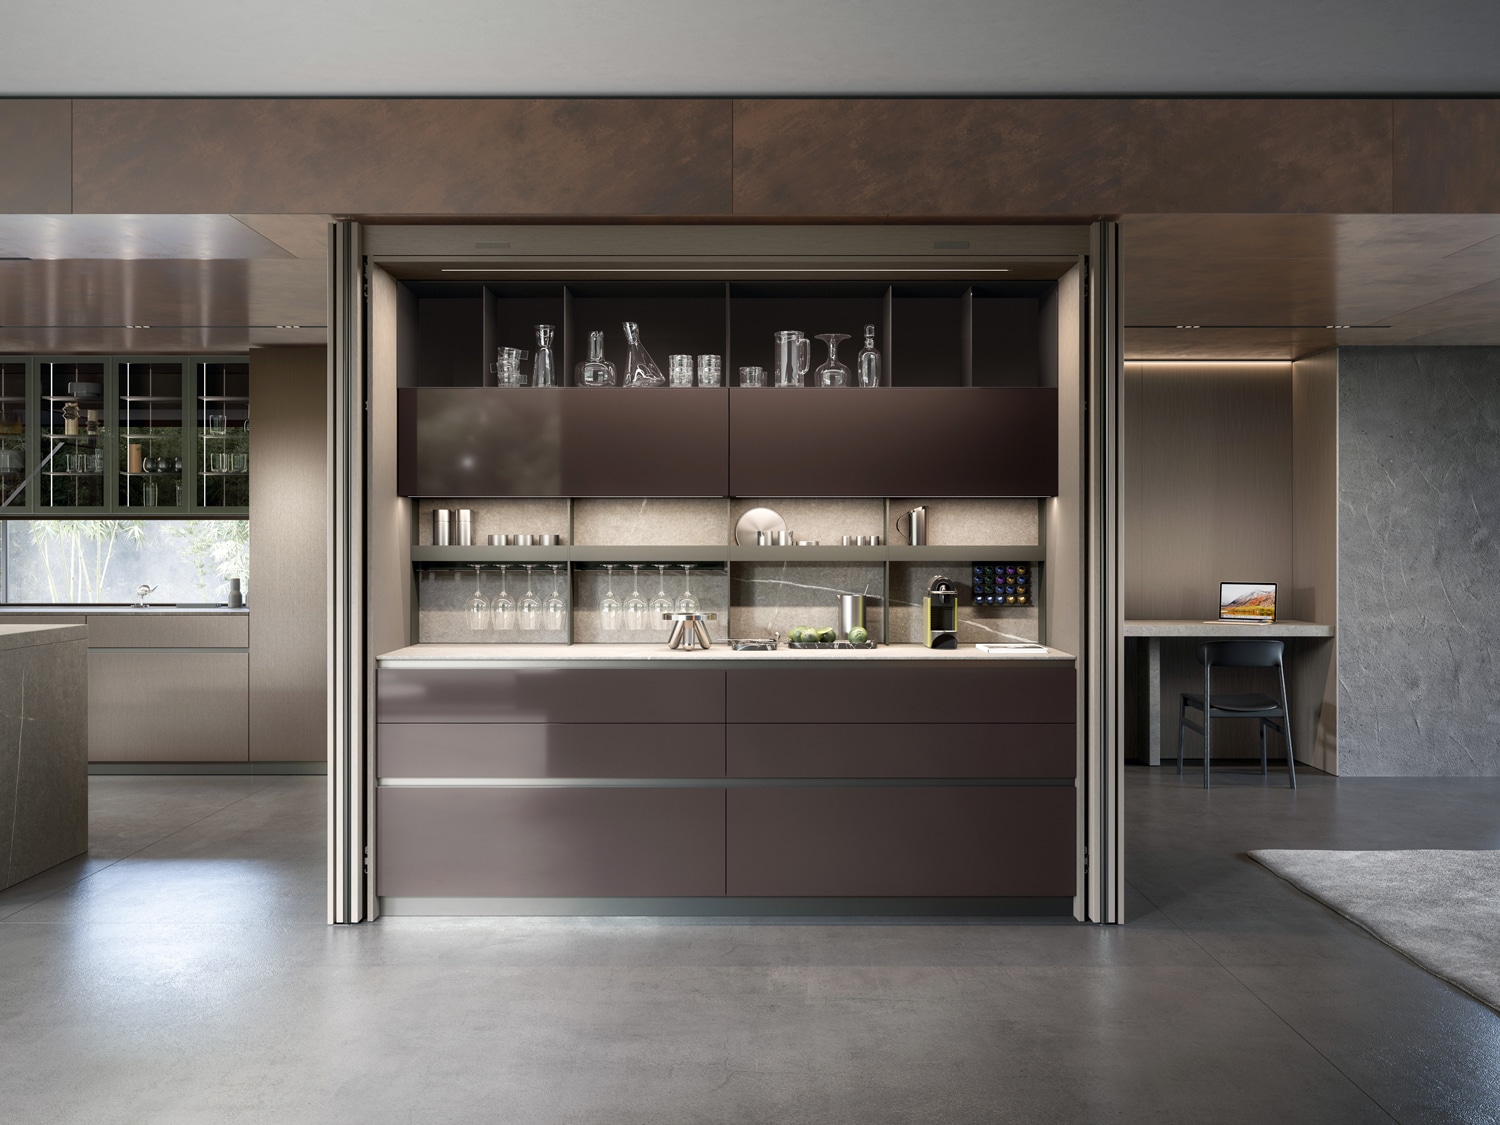 Inside, the Hide system can be customized with drawers, deep storage cabinets, open shelves, integrated appliances and an accessorized storage wall.